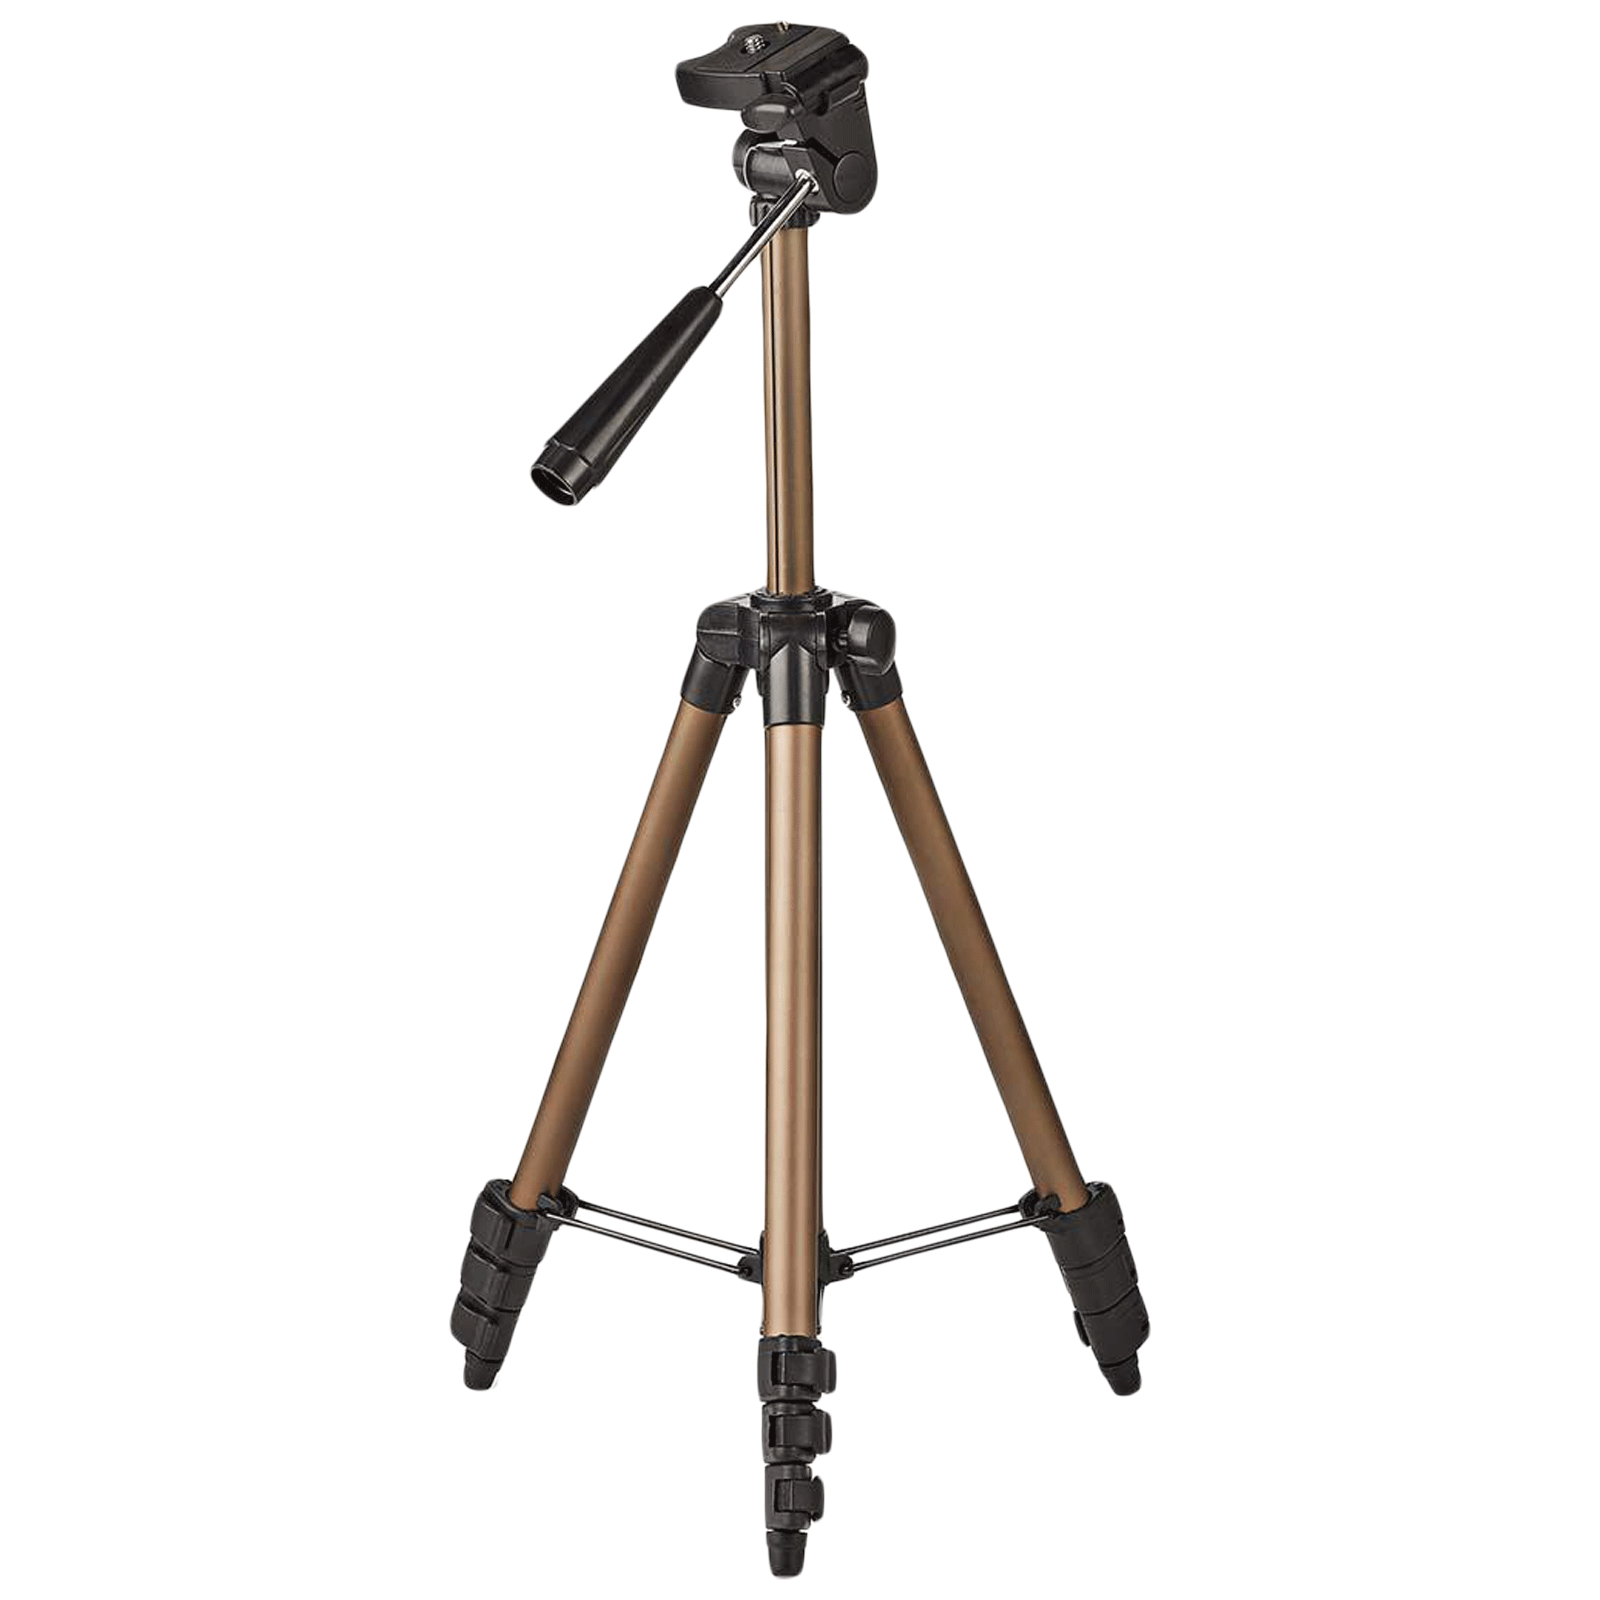 Nedis Adjustable 106 cm Tripod For Mobile Phones and Camera (Up to 1.5Kg, Extra Hook for Extra Weight, TPOD2000BZ, Black)_1